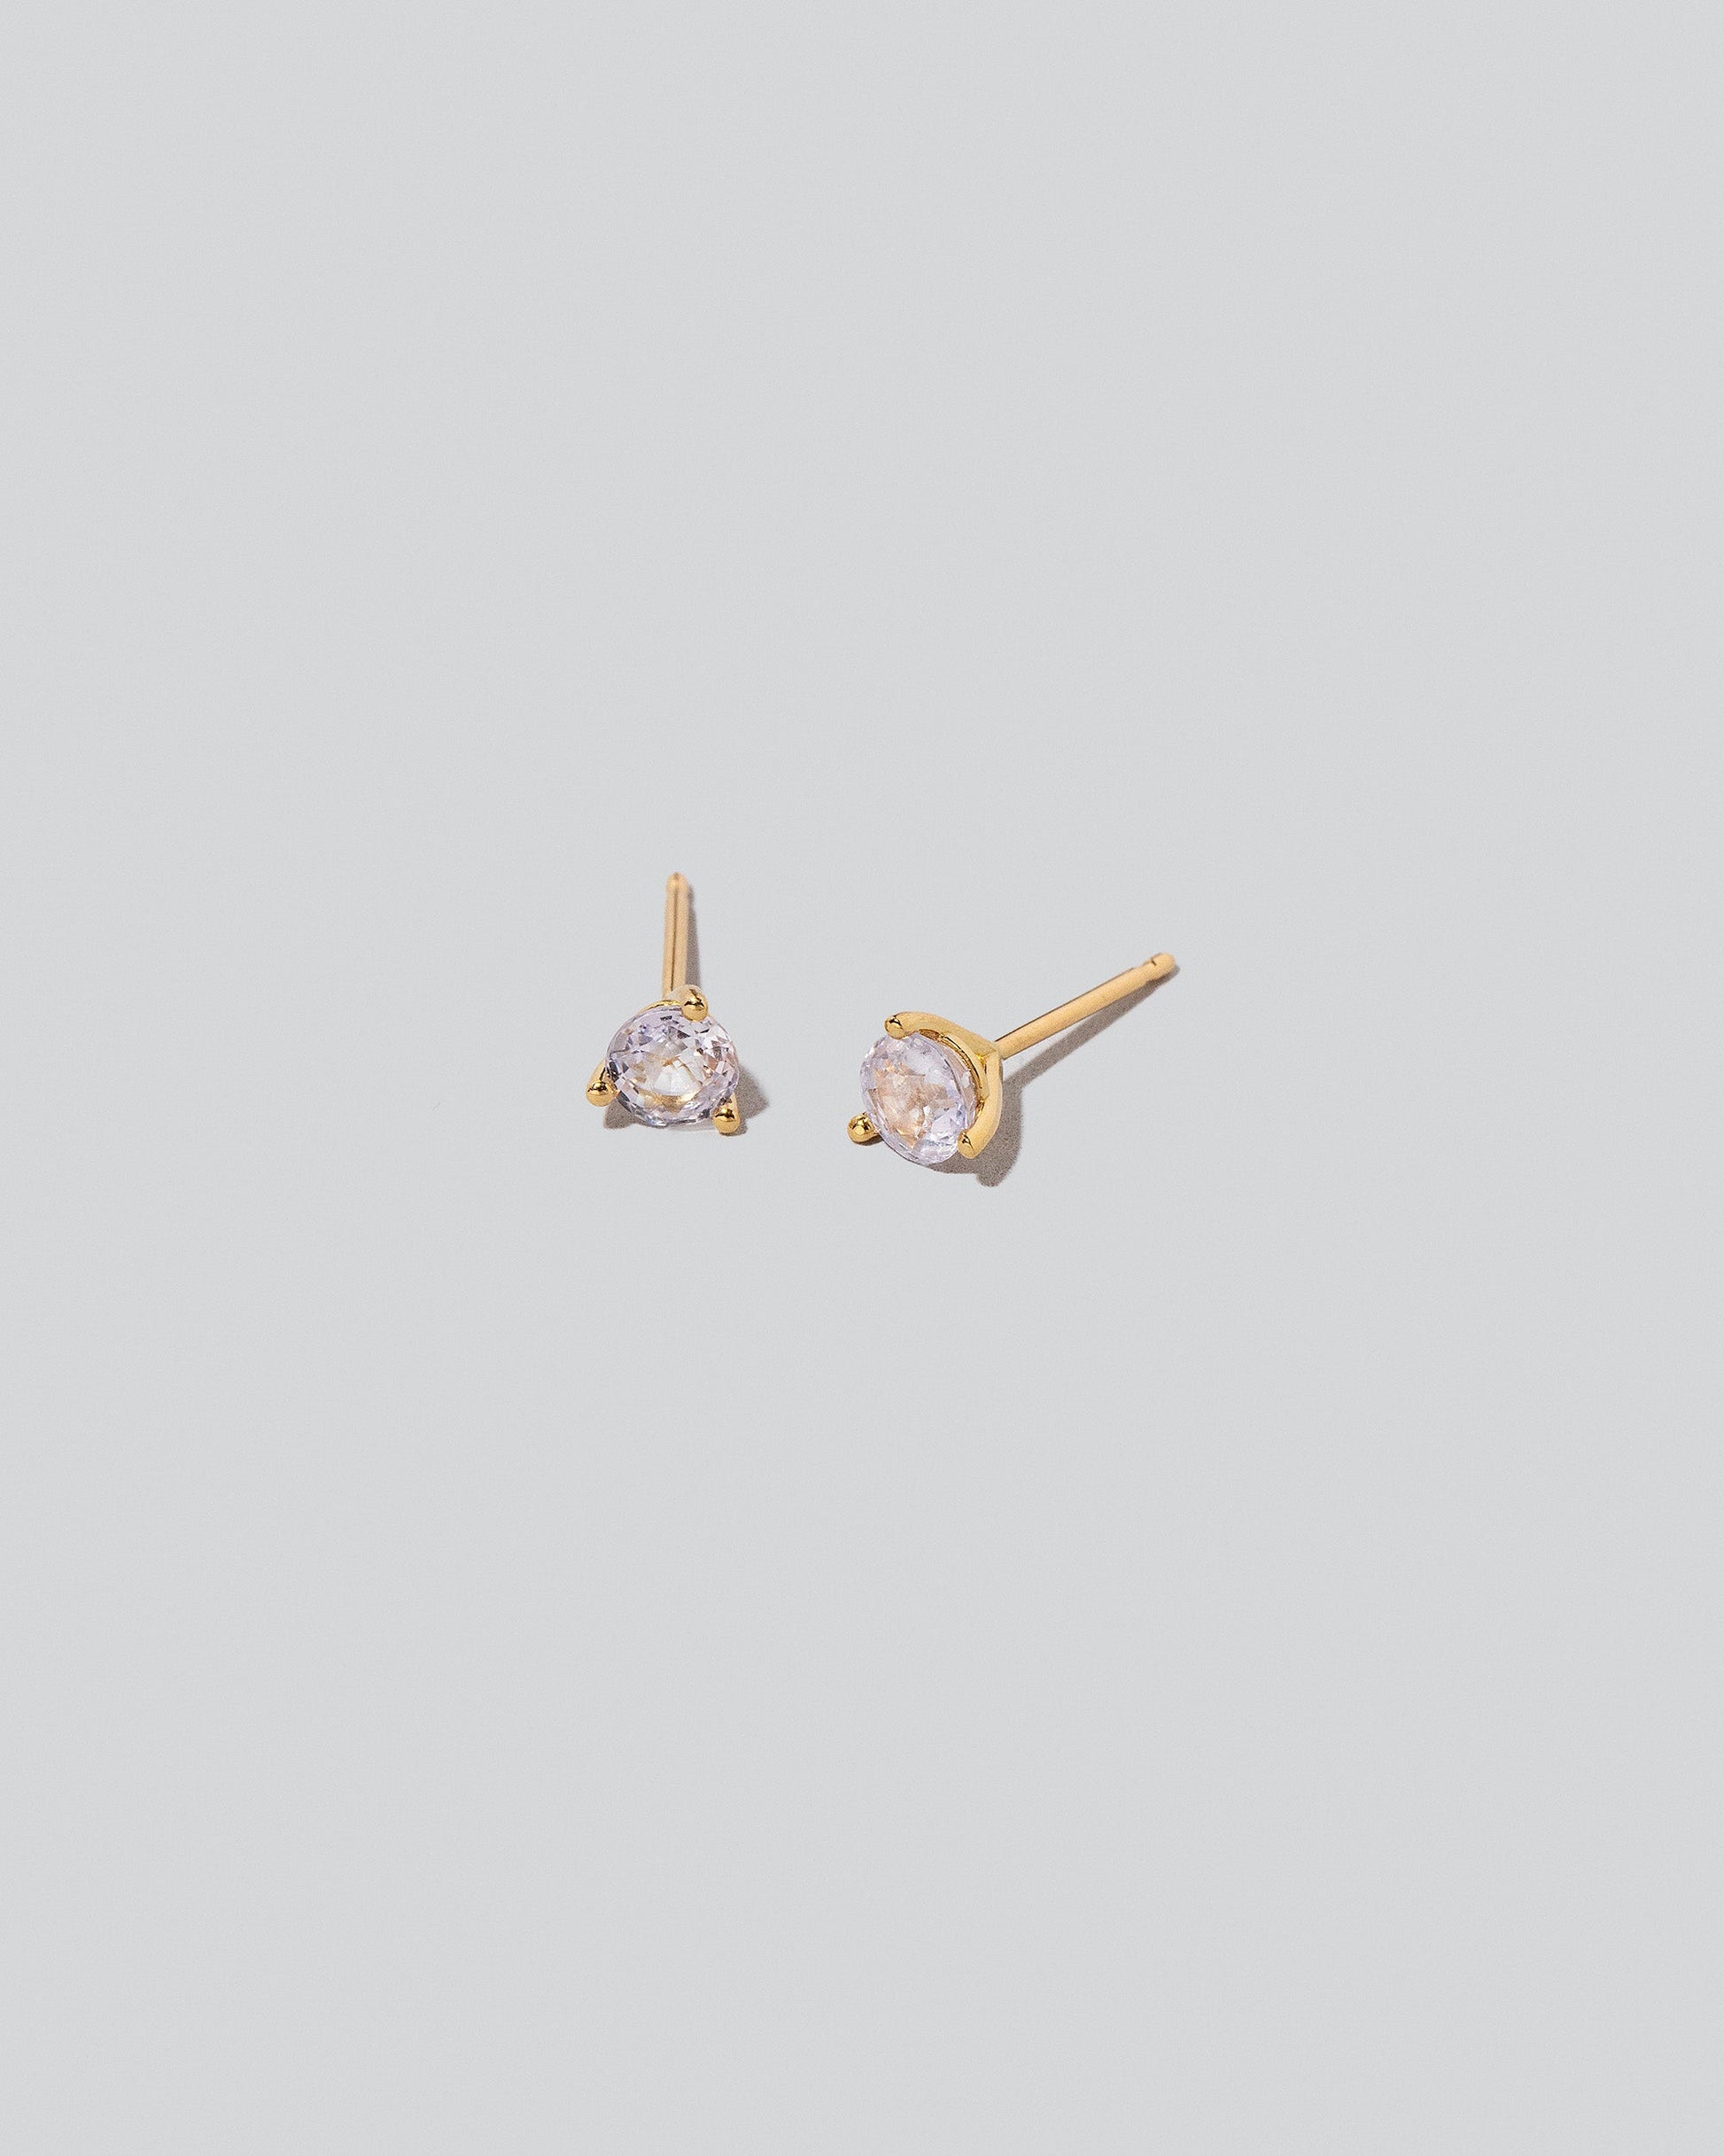 Martini Stud Earrings on light colored background.